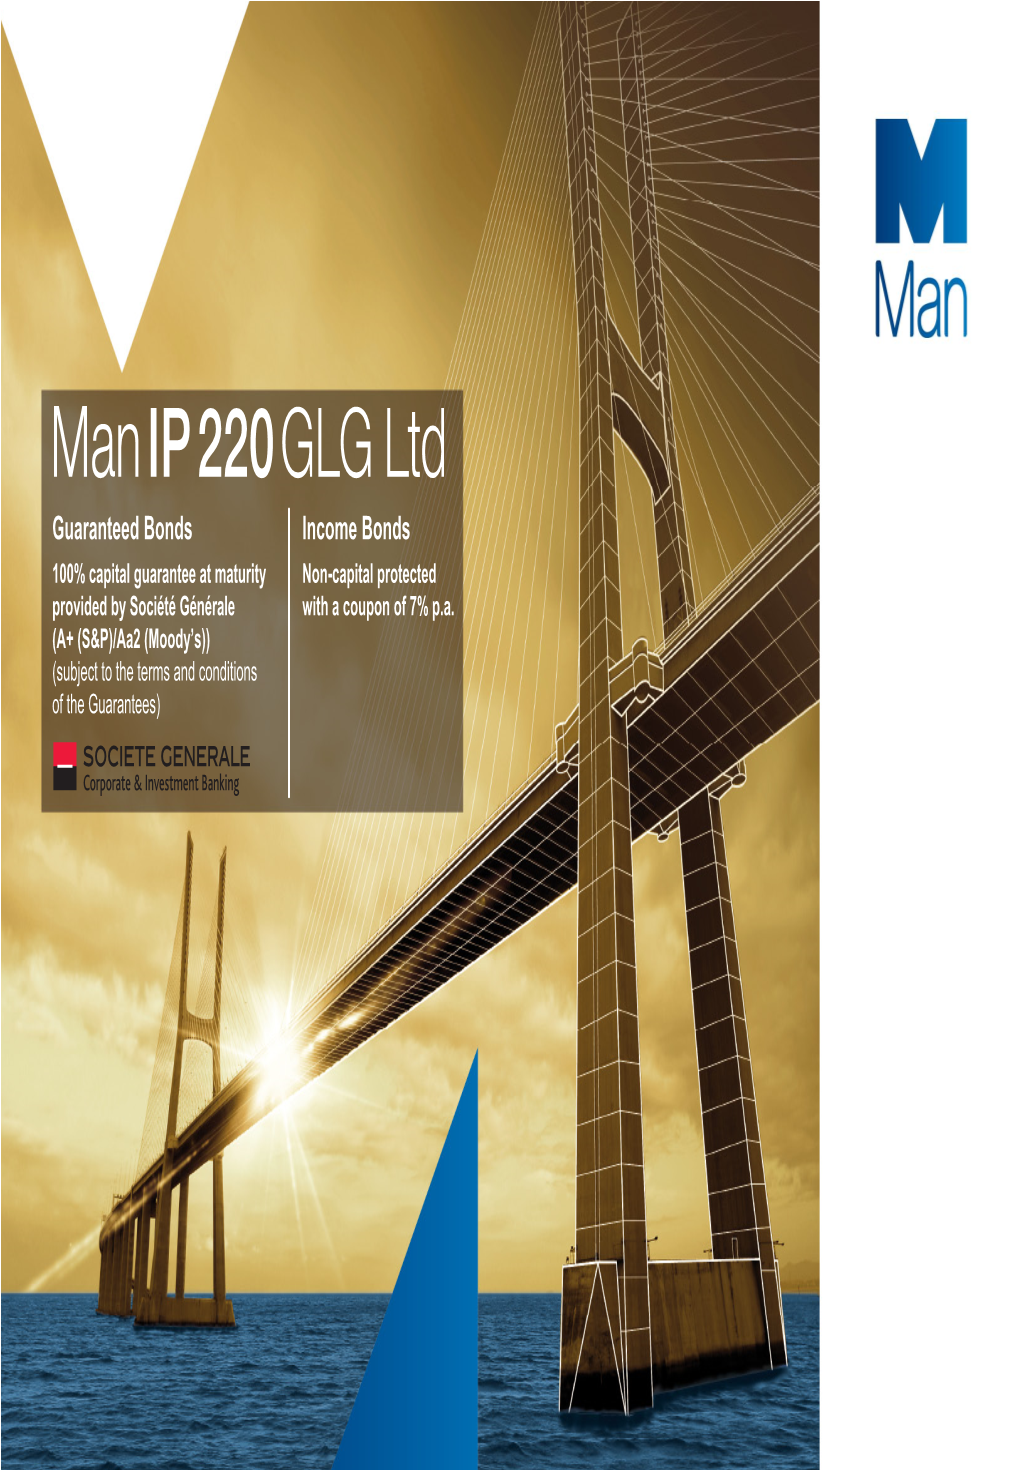 Man IP 220 GLG Ltd (The ‘Company’) Information Contained Herein Is Provided from the Man Database Except Where Otherwise Stated